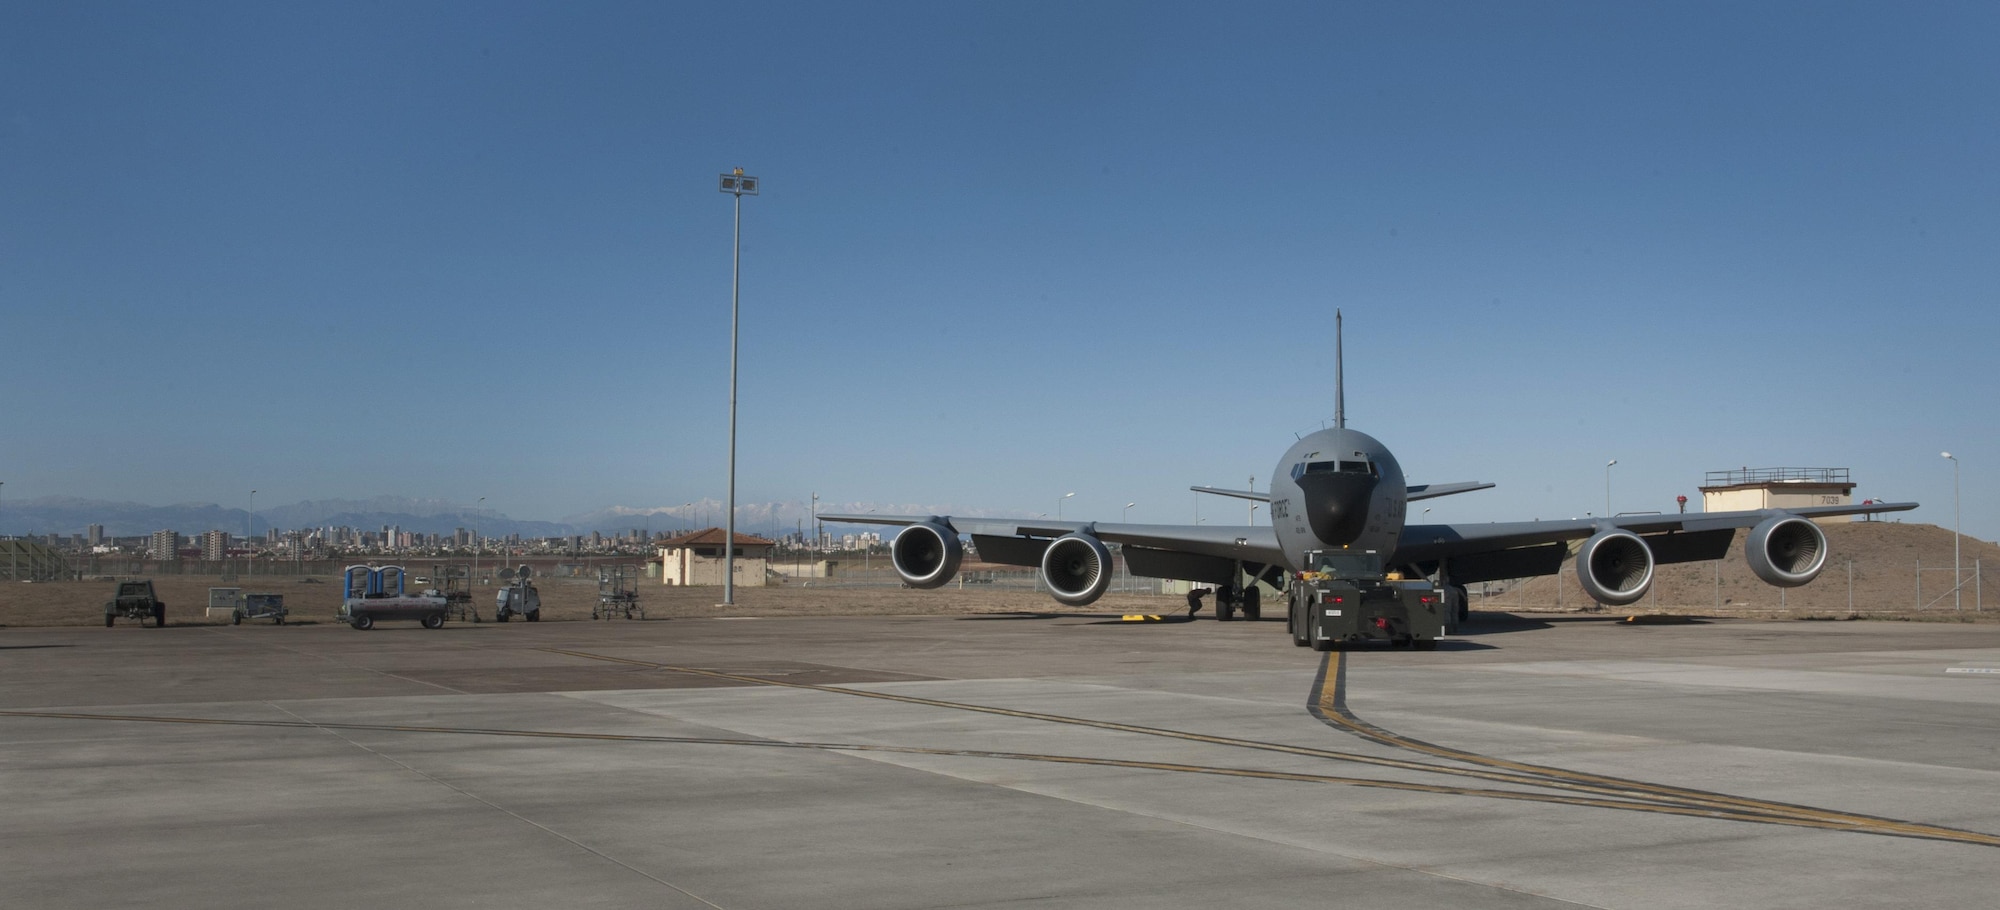 A KC-135 Stratotanker sits on an apron after completing a flight mission to refuel coalition forces aircraft supporting Operation INHERENT RESOLVE Nov. 11, 2016, at Incirlik Air Base, Turkey. Coalition forces rely on the Stratotankers to provide in air refueling to extend their operational capabilities. (U.S. Air Force photo by Staff Sgt. Jack Sanders)